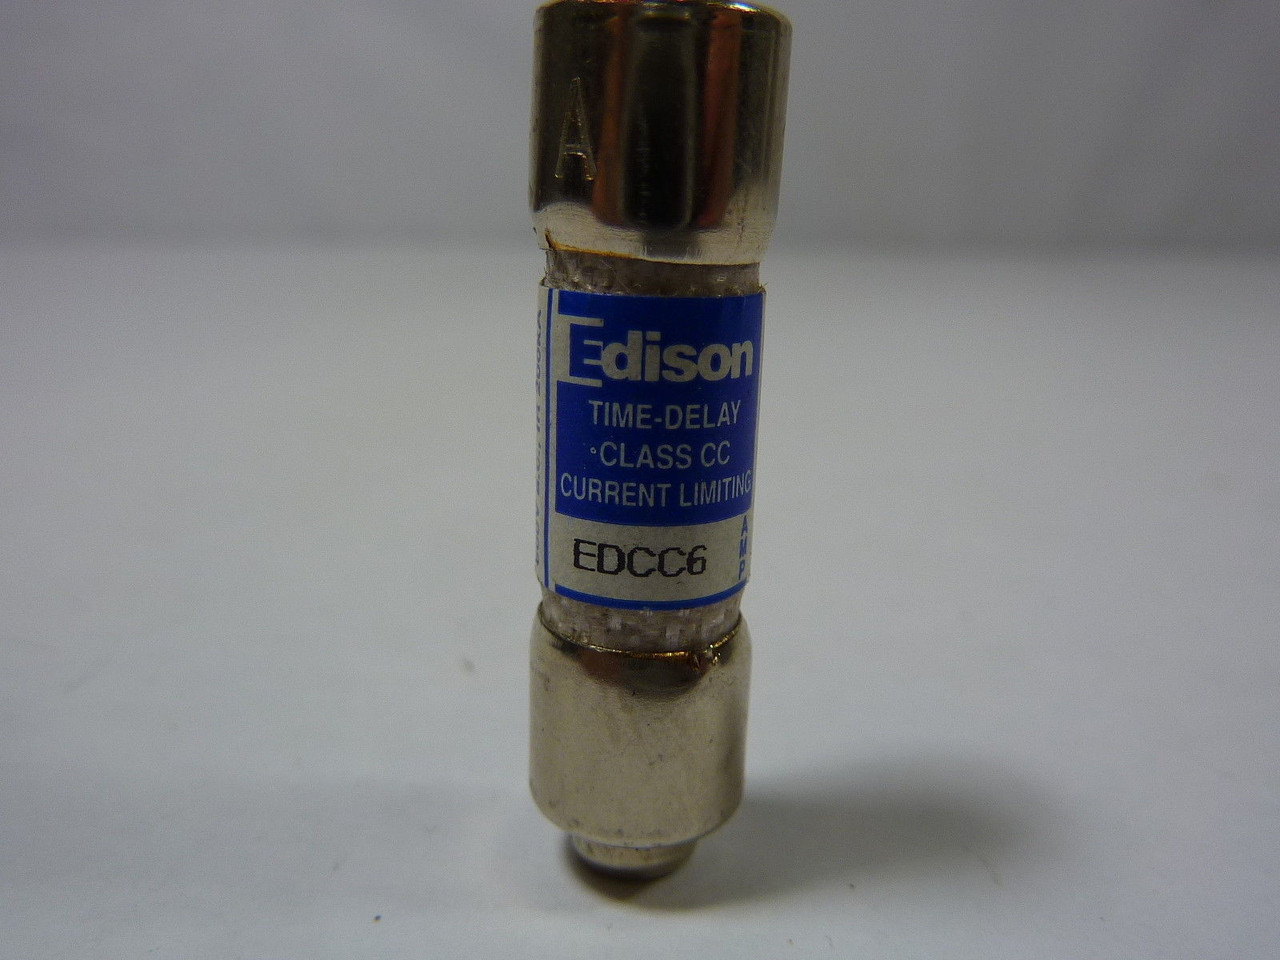 Edison EDCC6 Current Limiting Time Delay Fuse 6A 600V USED